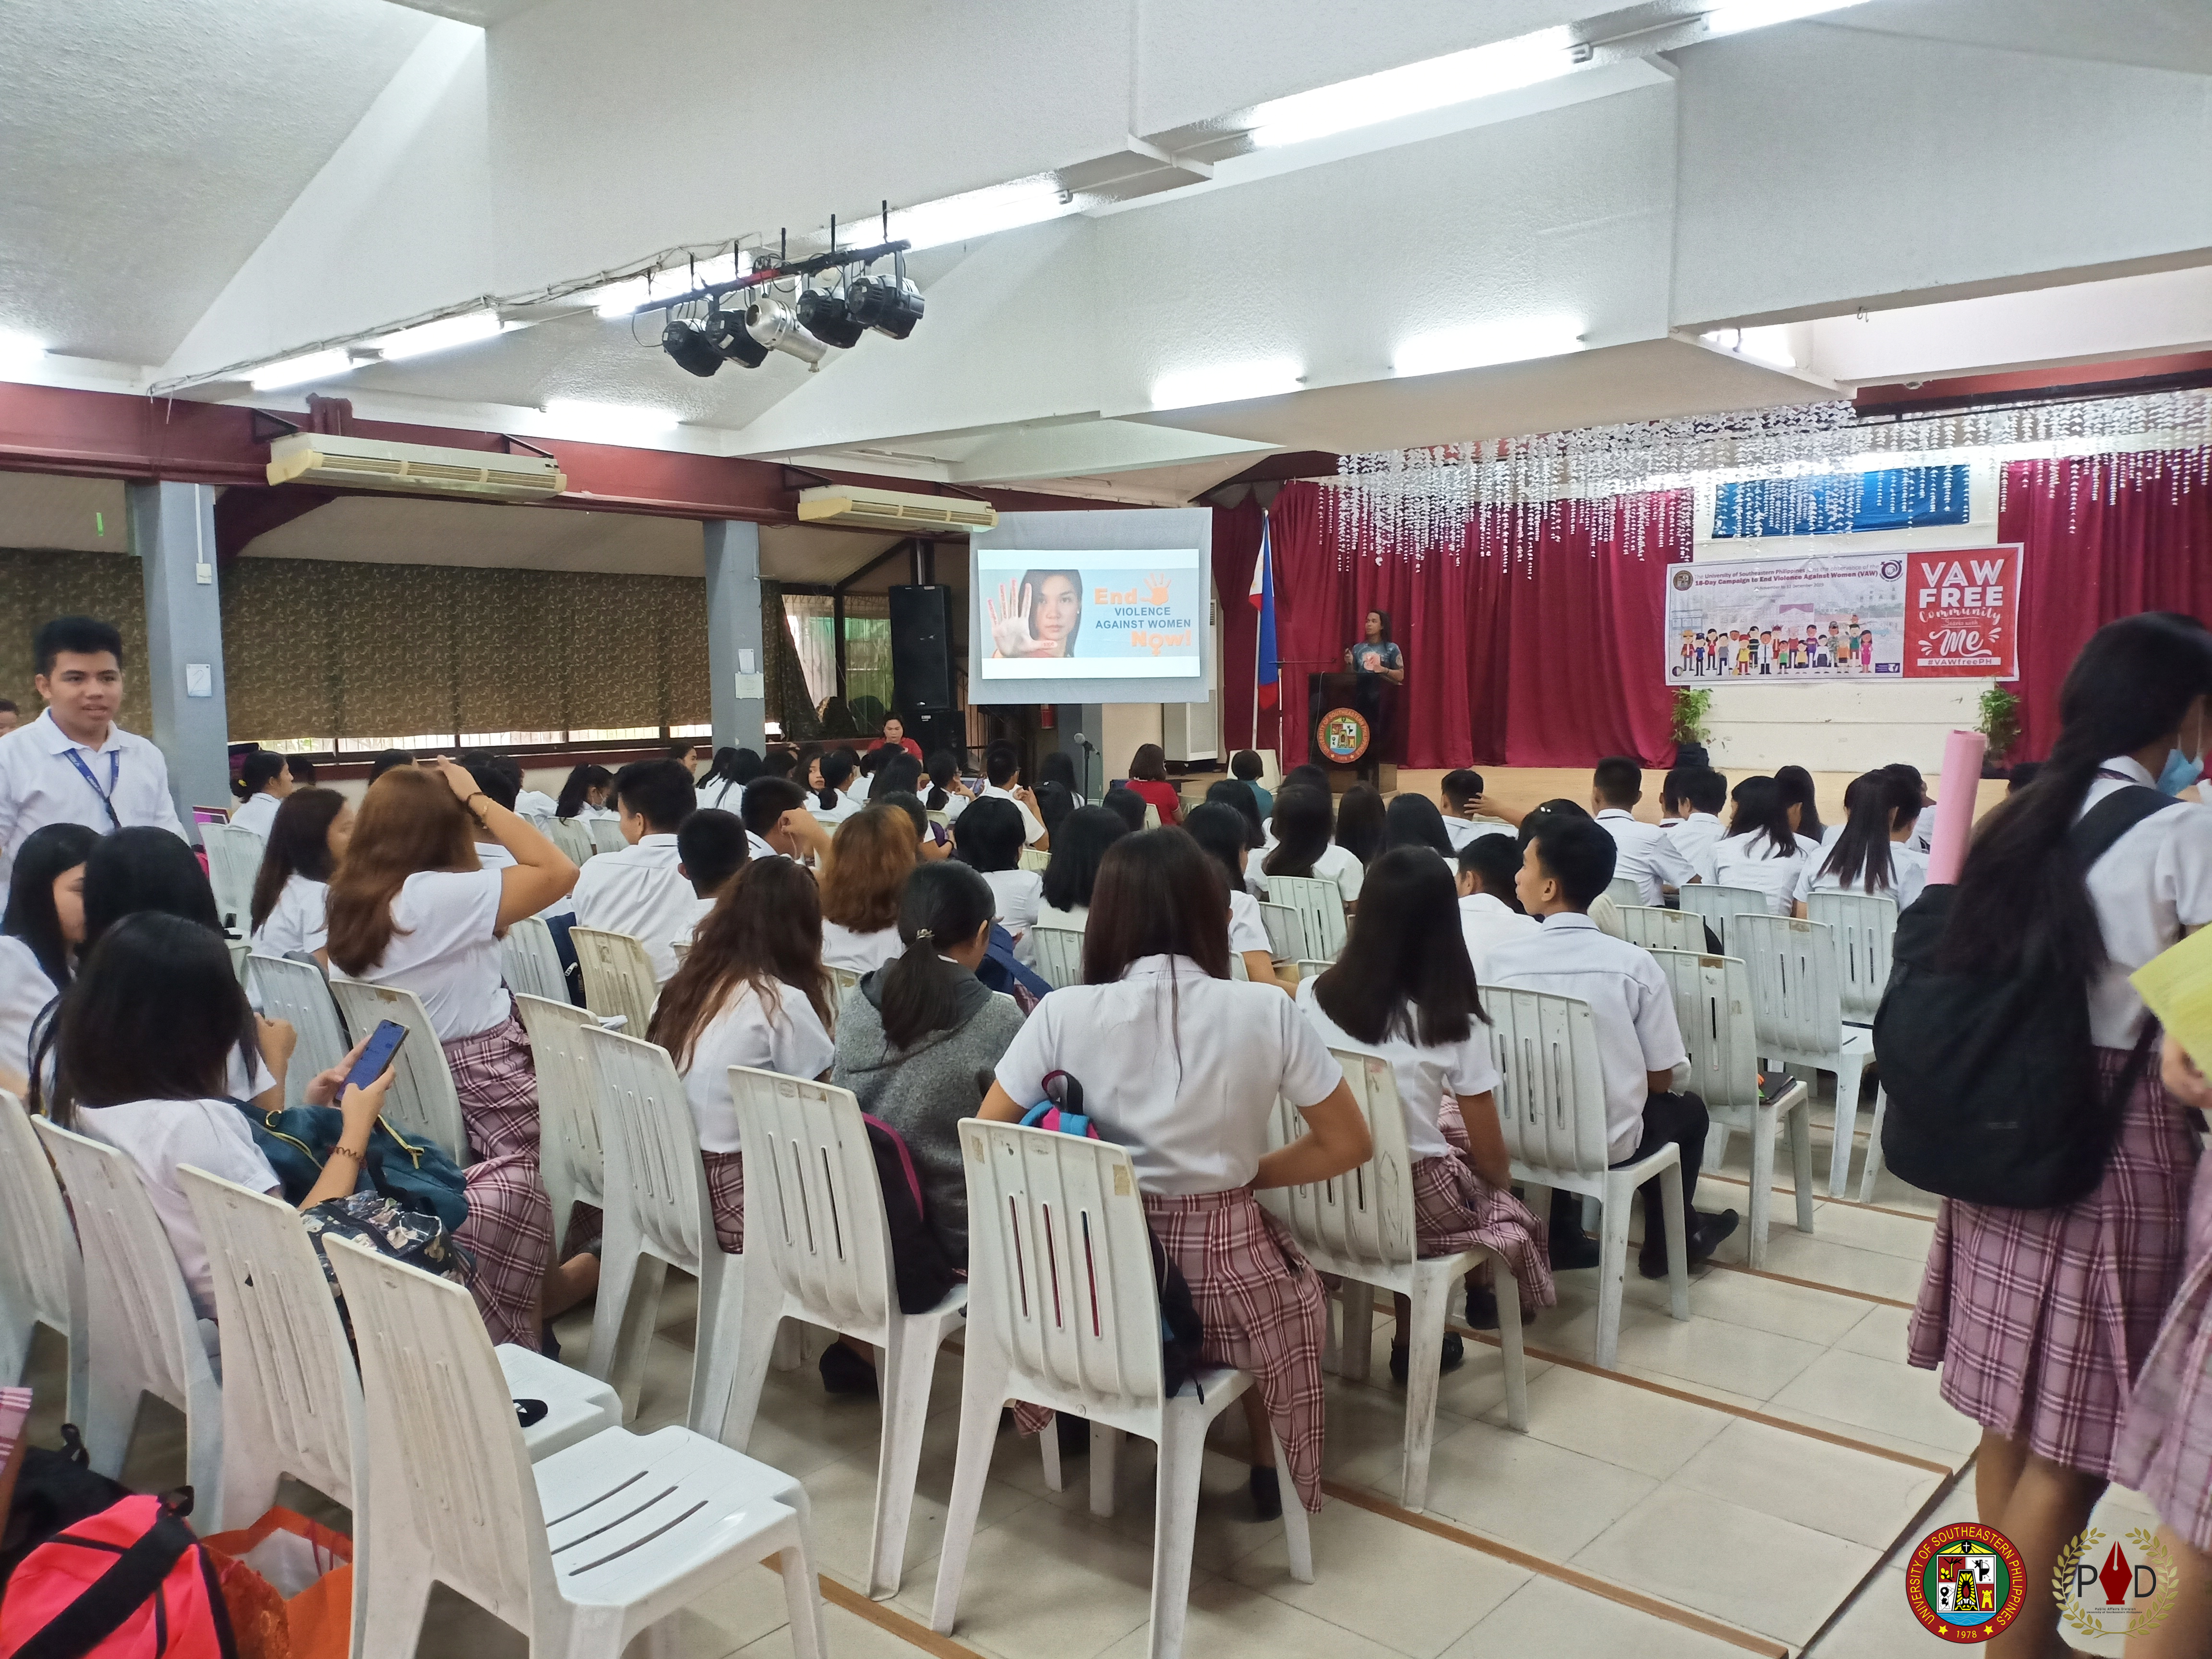 December 2, 2019 – The University of Southeastern Philippines (USeP) conducts a Seminar-Lecture on various forms of Violence Against Women (VAW) in observance of the 18-Day Campaign to End Violence Against Women through USeP’s Gender and Development (GAD) Division in partnership with the Philippine Commission on Women at the USeP Social Hall.